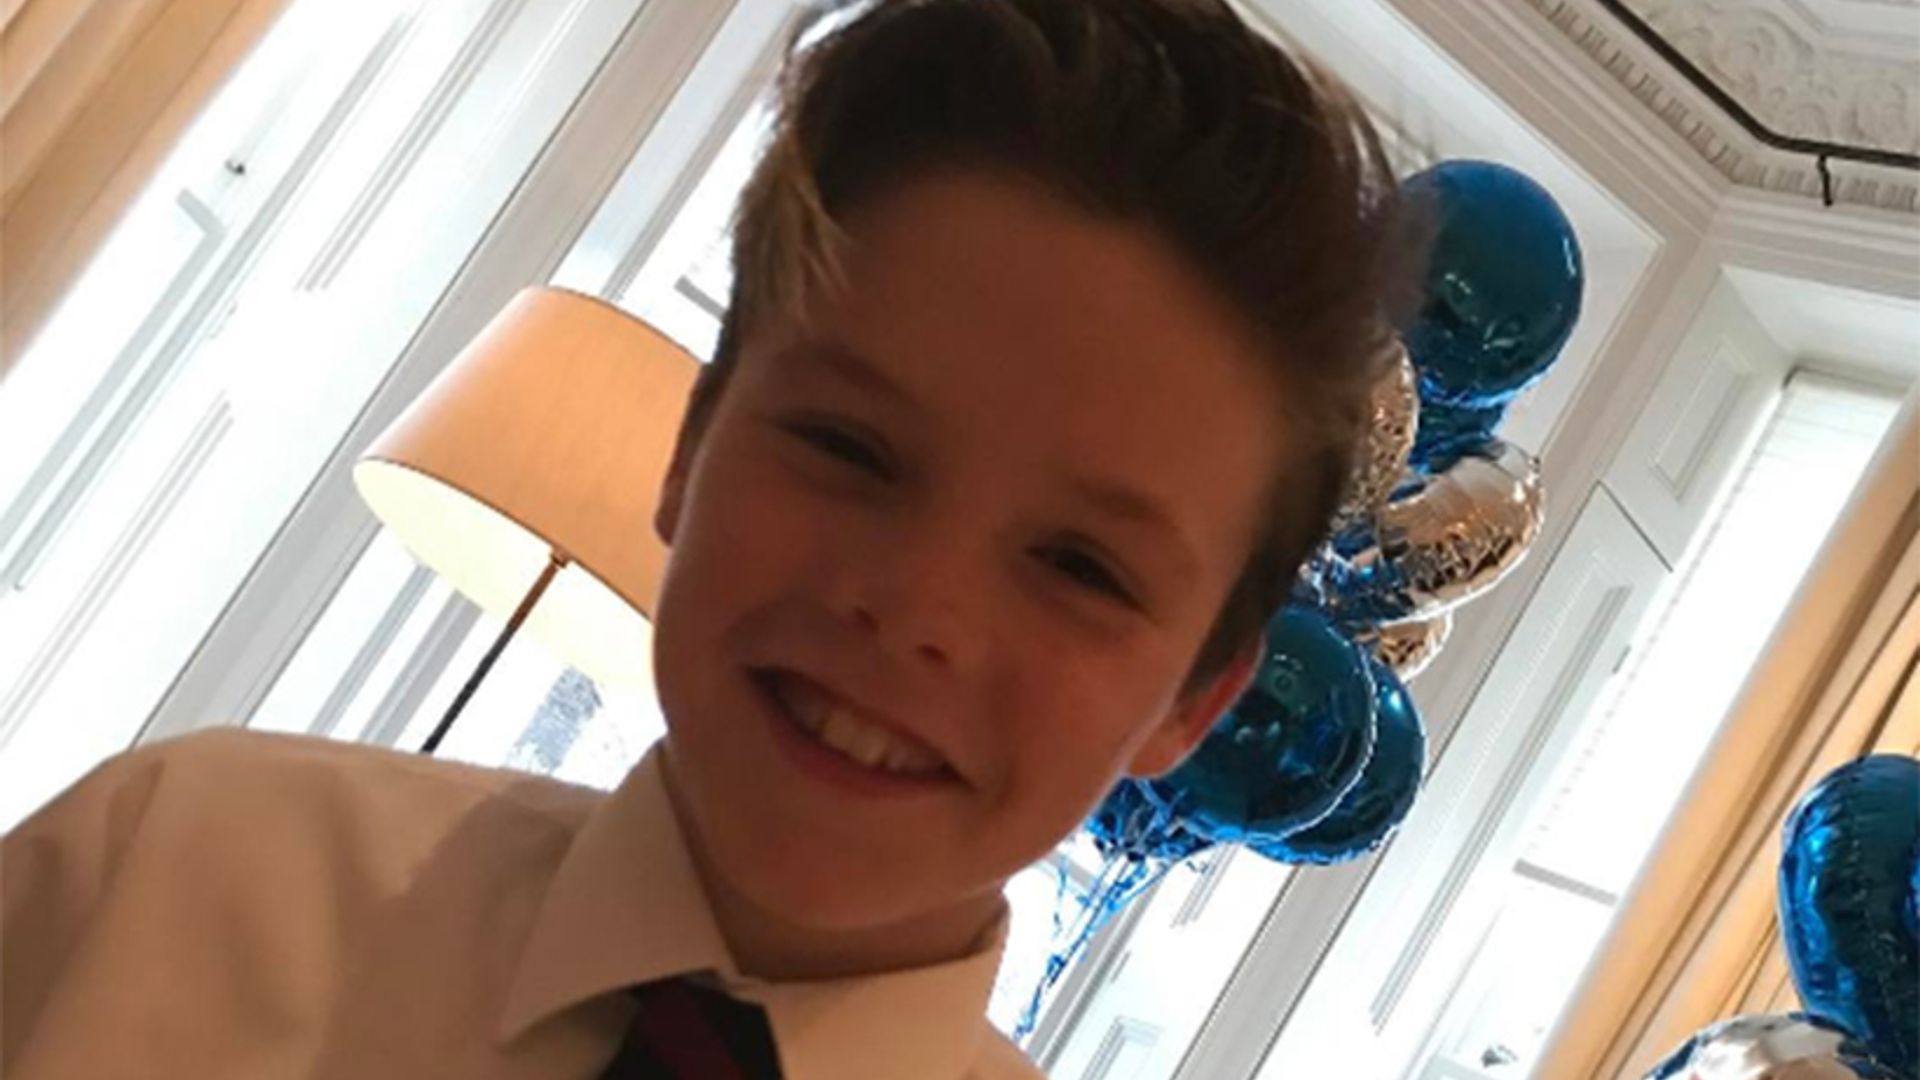 Cruz Beckham follows in his mum's footsteps and channels his inner Spice Girl